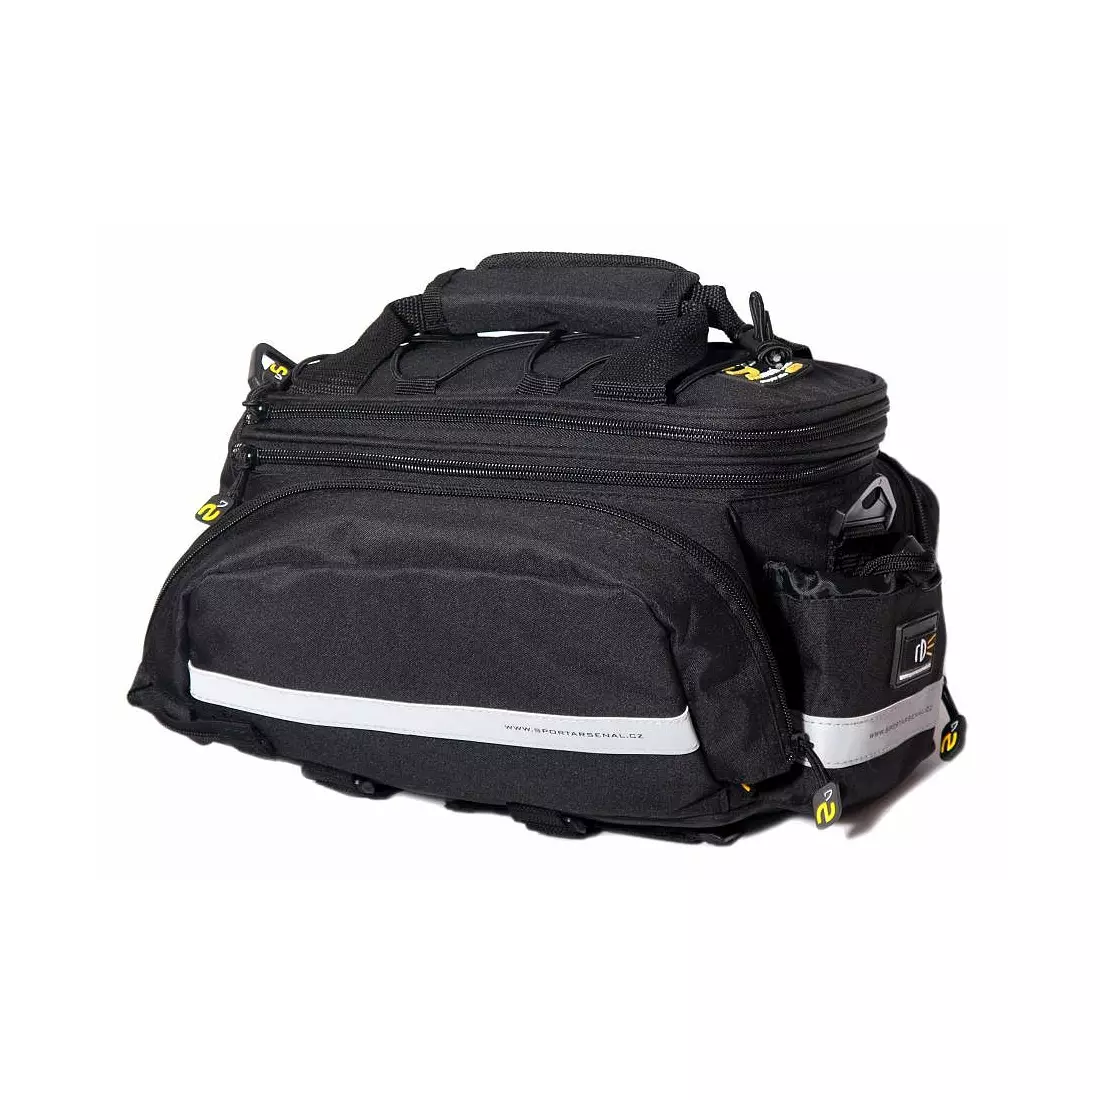 SPORT ARSENAL 480 bicycle pannier for the rack